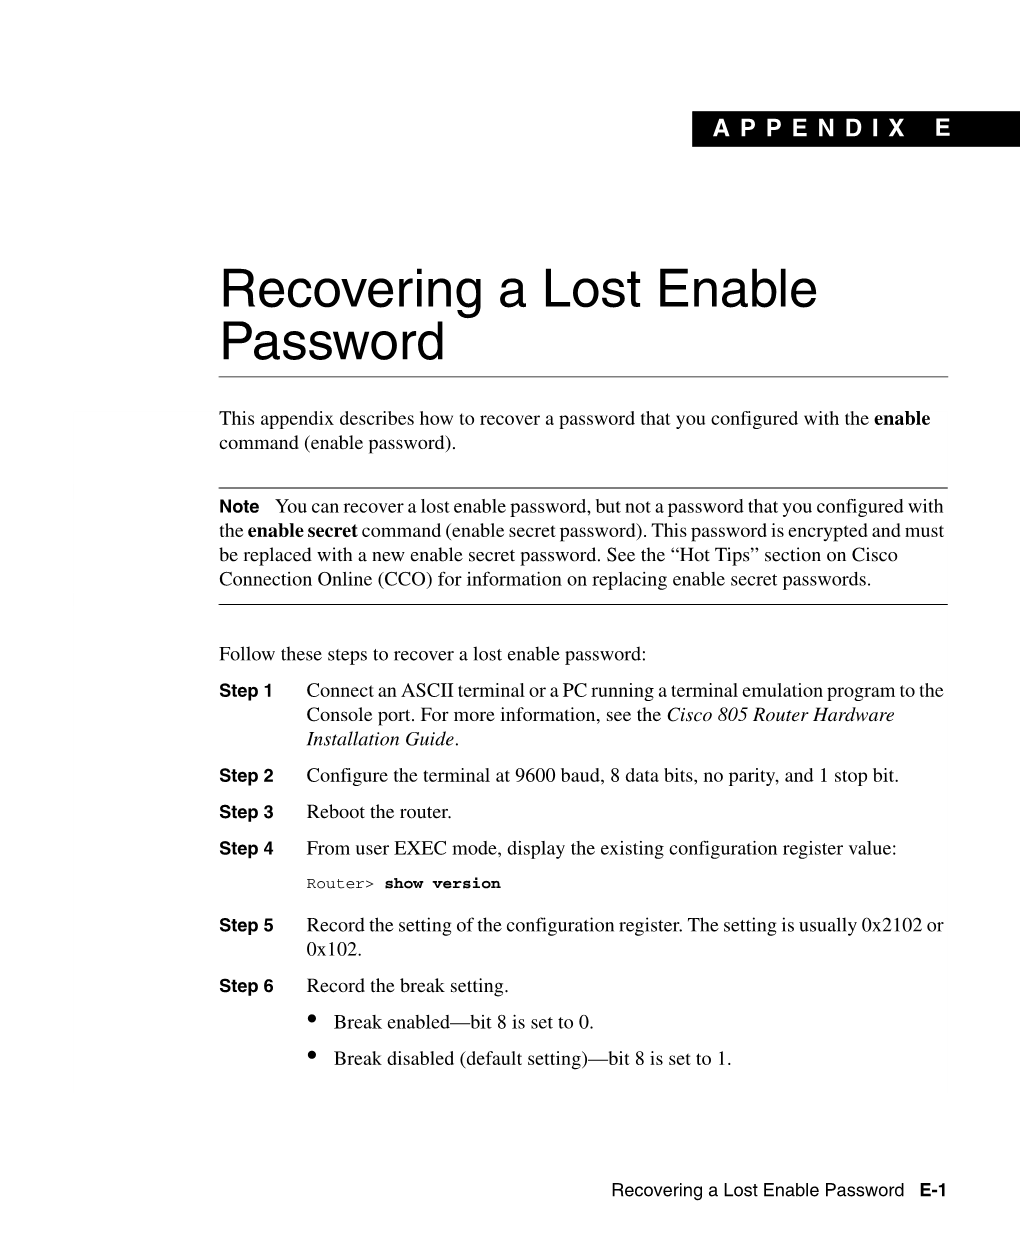 Recovering a Lost Enable Password